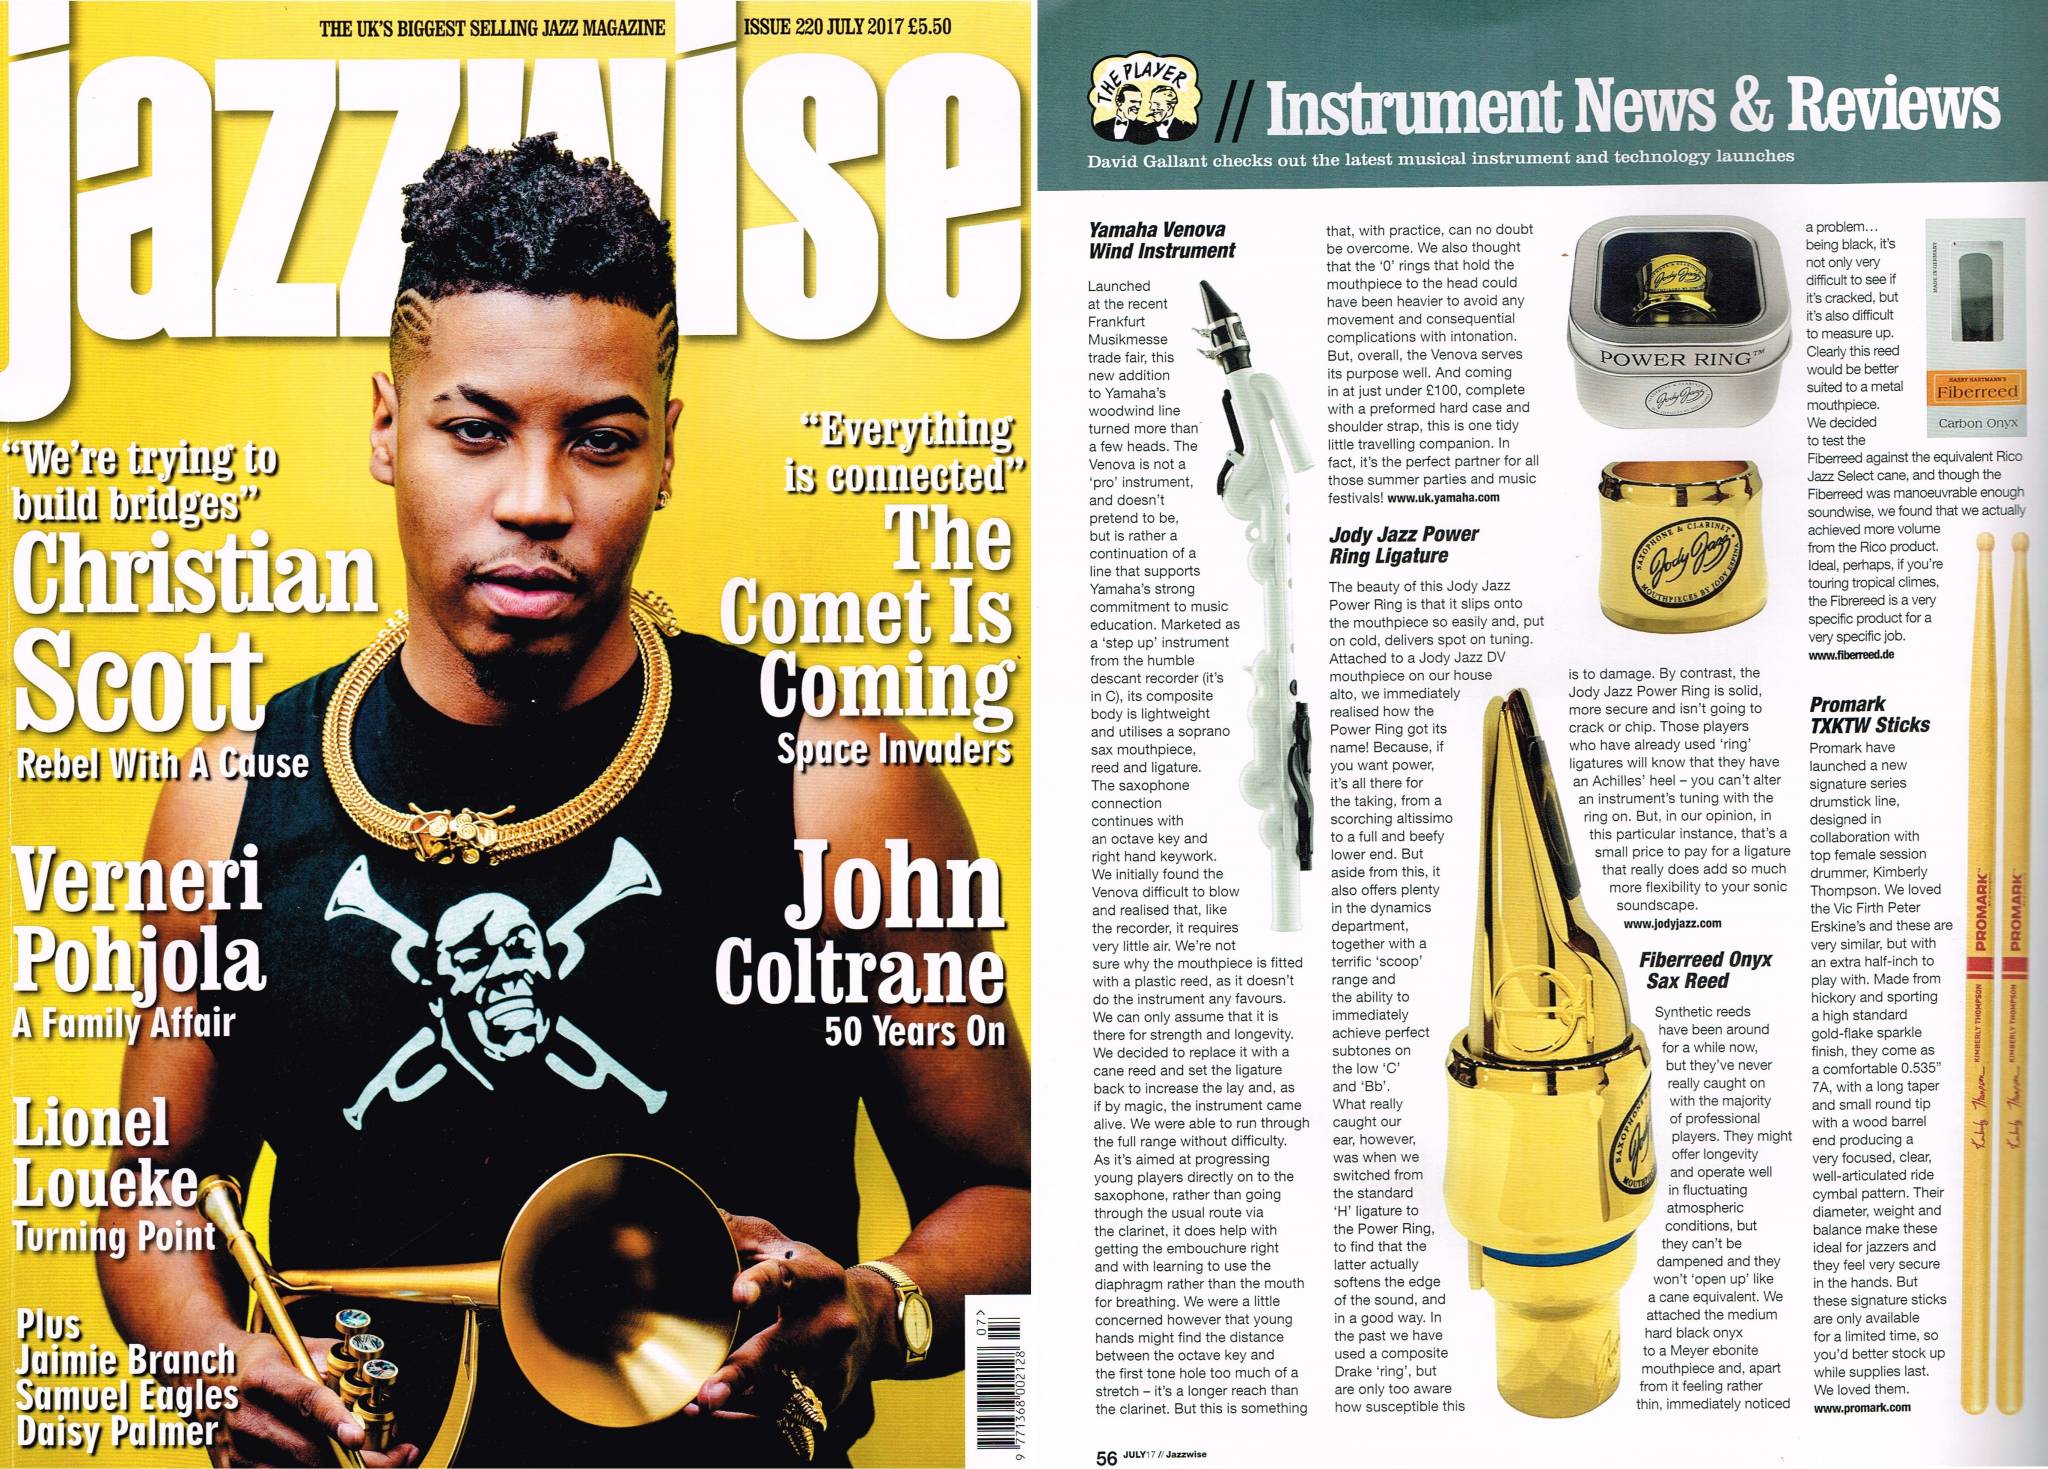 Jazzwise Review of POWER RING Ligature